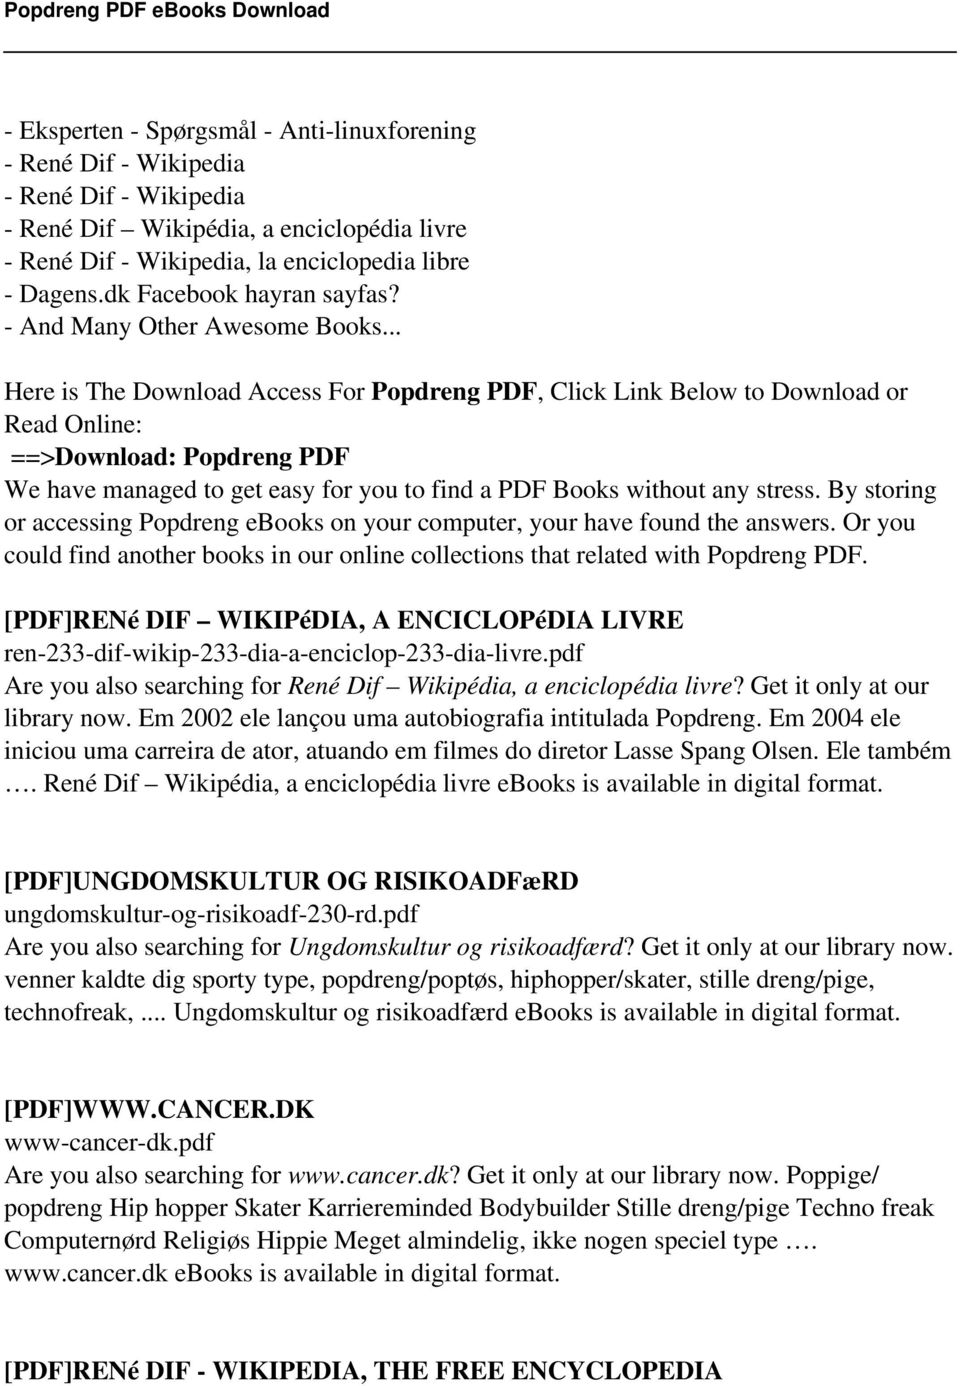 .. Here is The Download Access For Popdreng PDF, Click Link Below to Download or Read Online: ==>Download: Popdreng PDF We have managed to get easy for you to find a PDF Books without any stress.